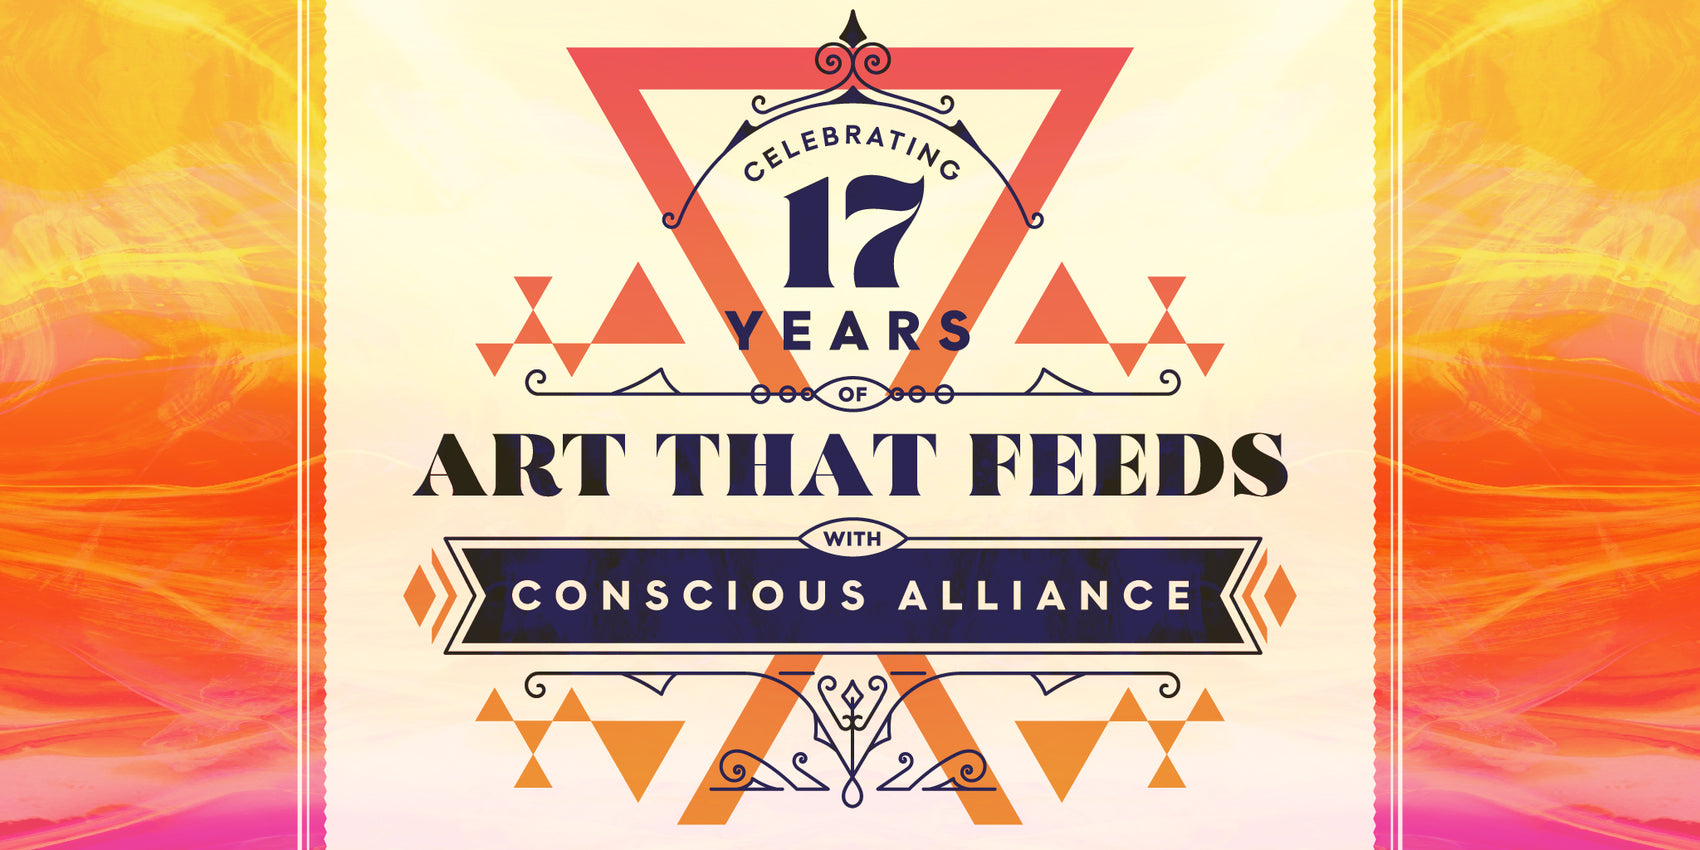 Art Show :: Celebrating 17 Years of Art That Feeds